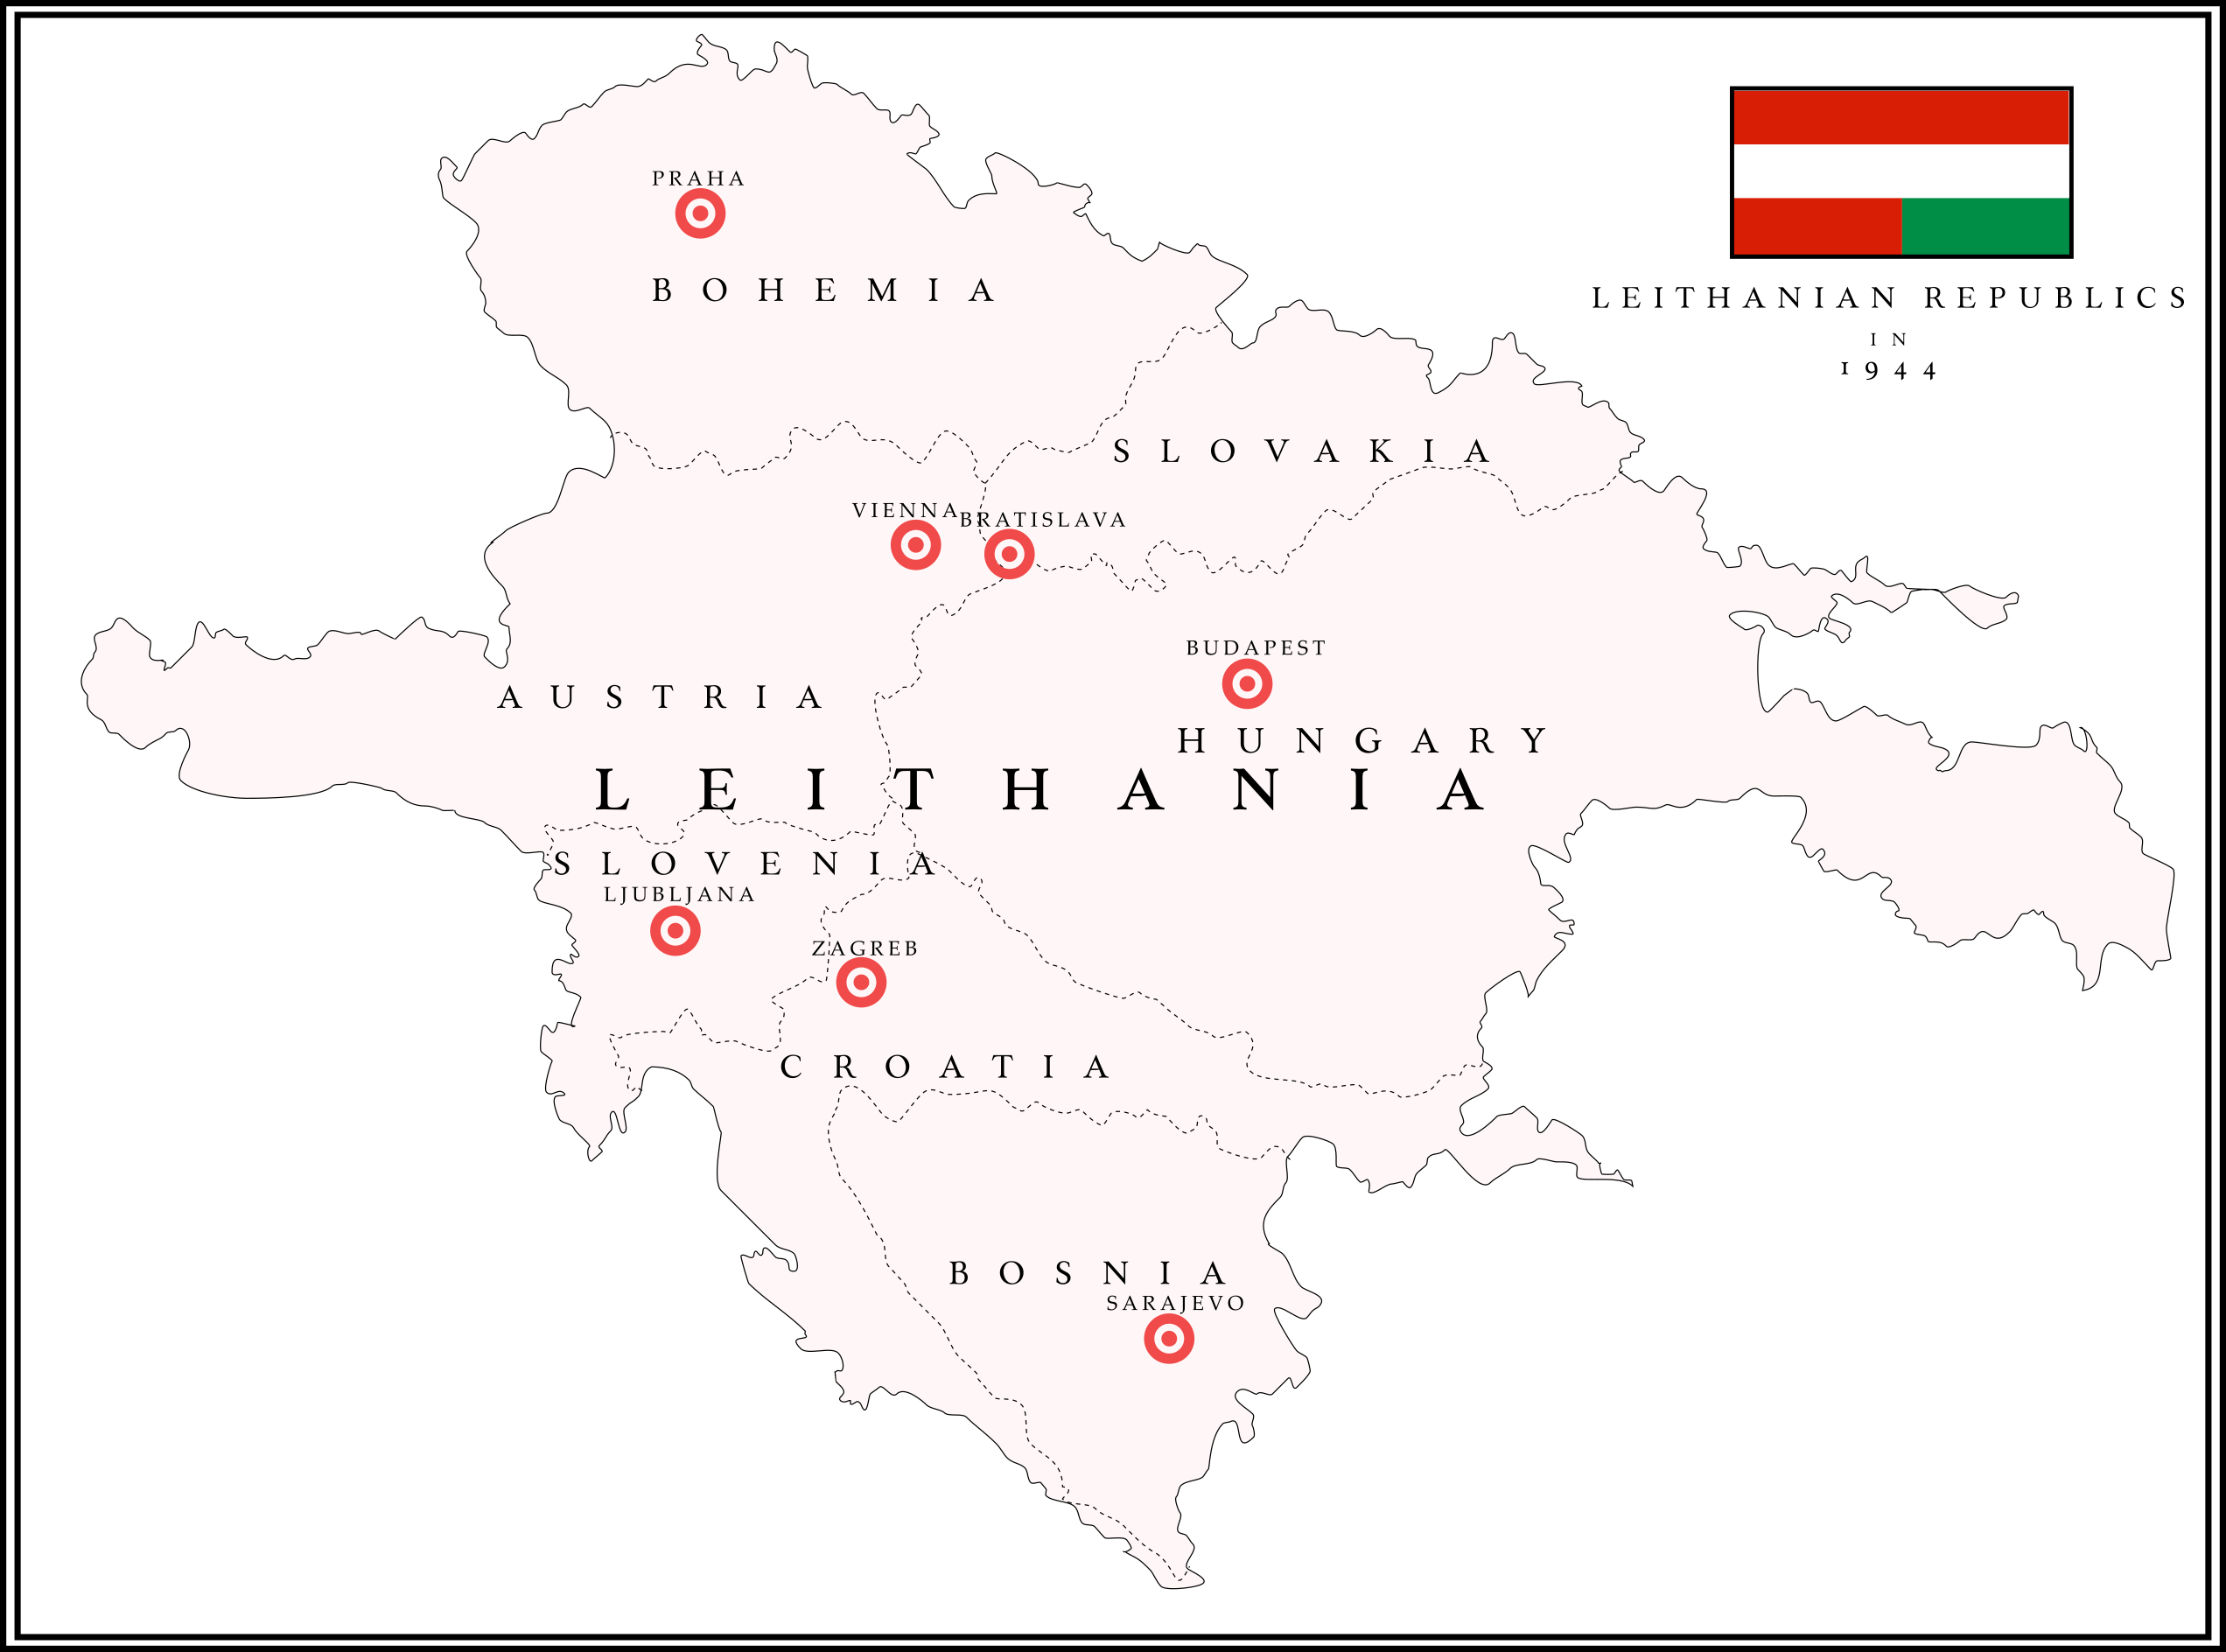 the_leithanian_republics_in_1944_ad_by_daeres-dckc69s.png